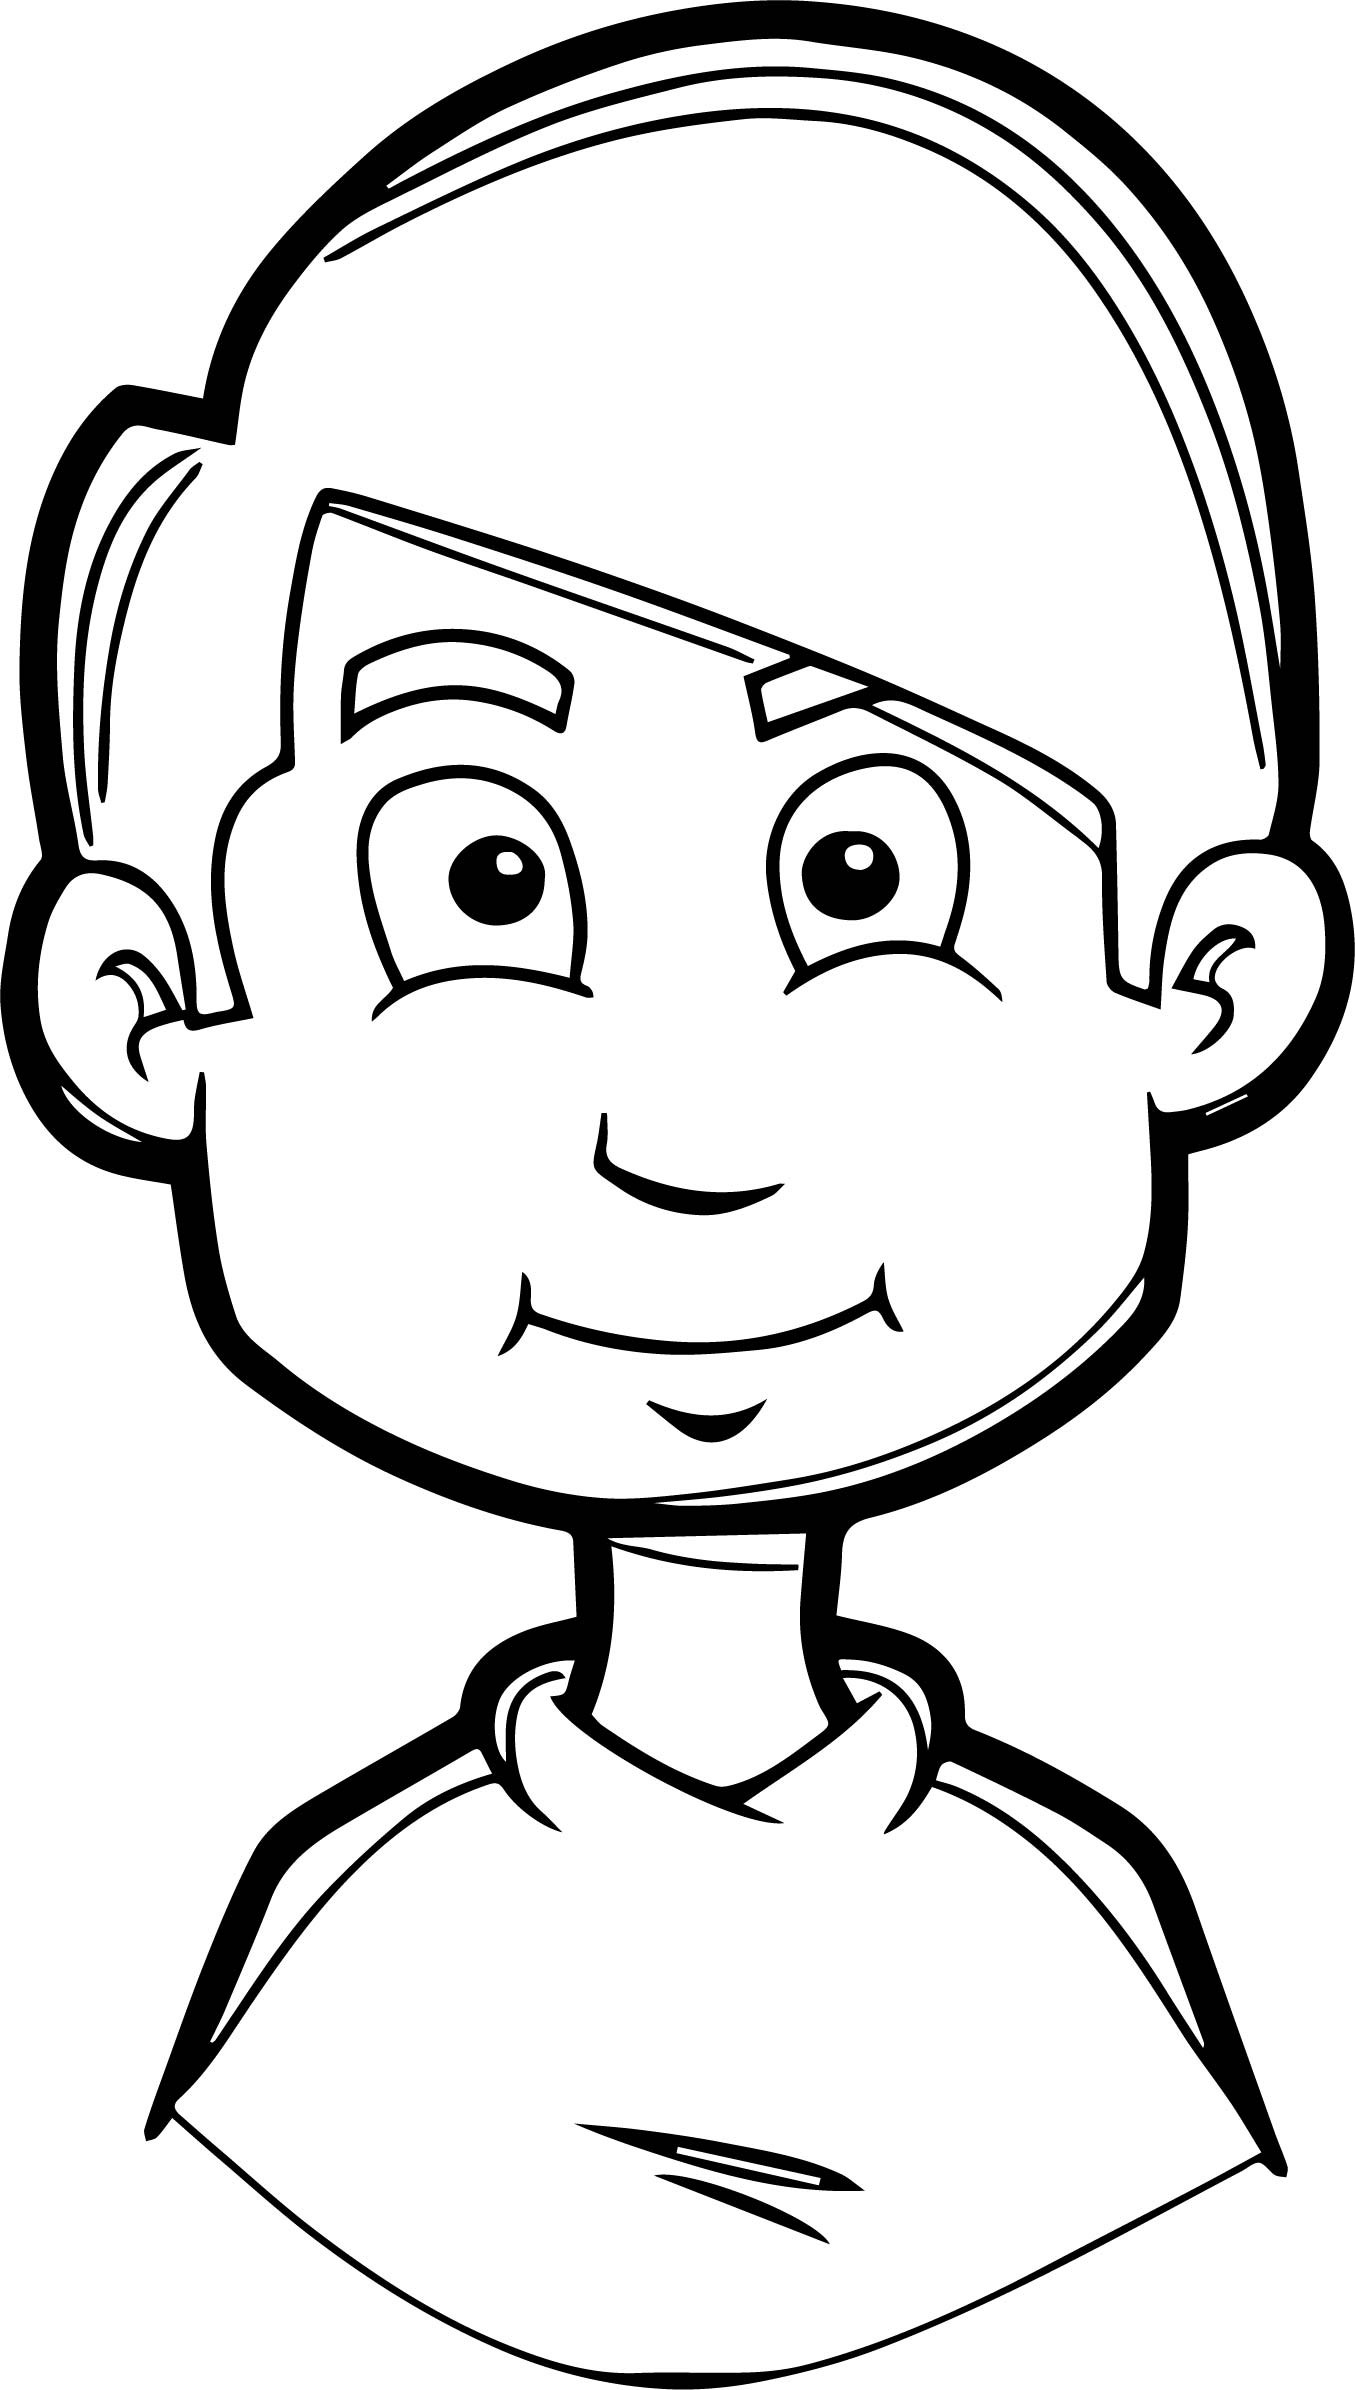 Coloring Pages Of Faces Of Boys
 Boy Soccer Face Coloring Page